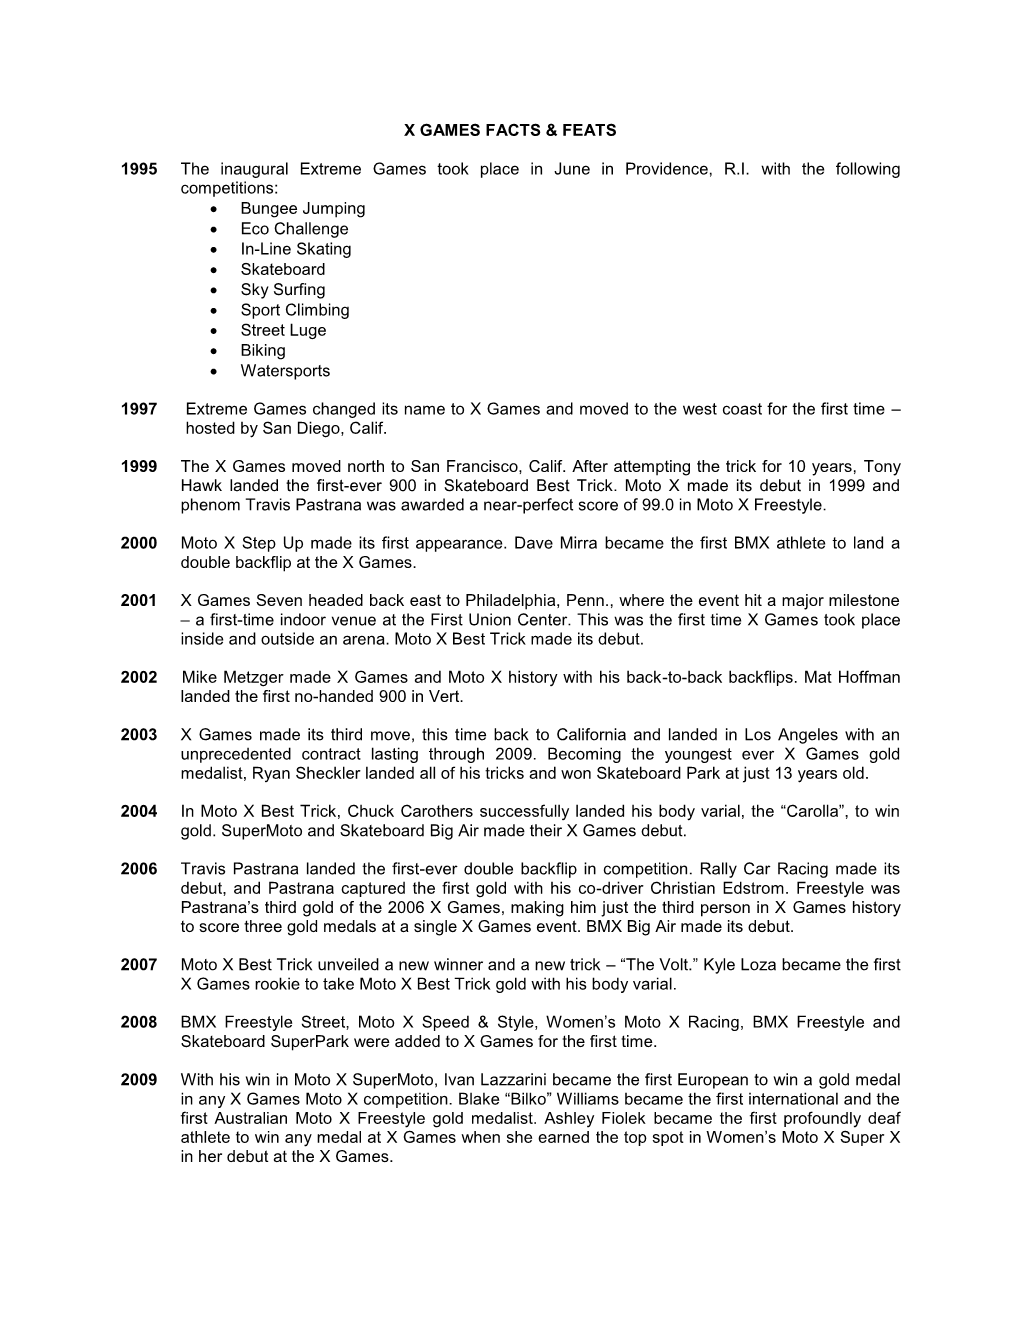 X GAMES FACTS & FEATS 1995 the Inaugural Extreme Games Took